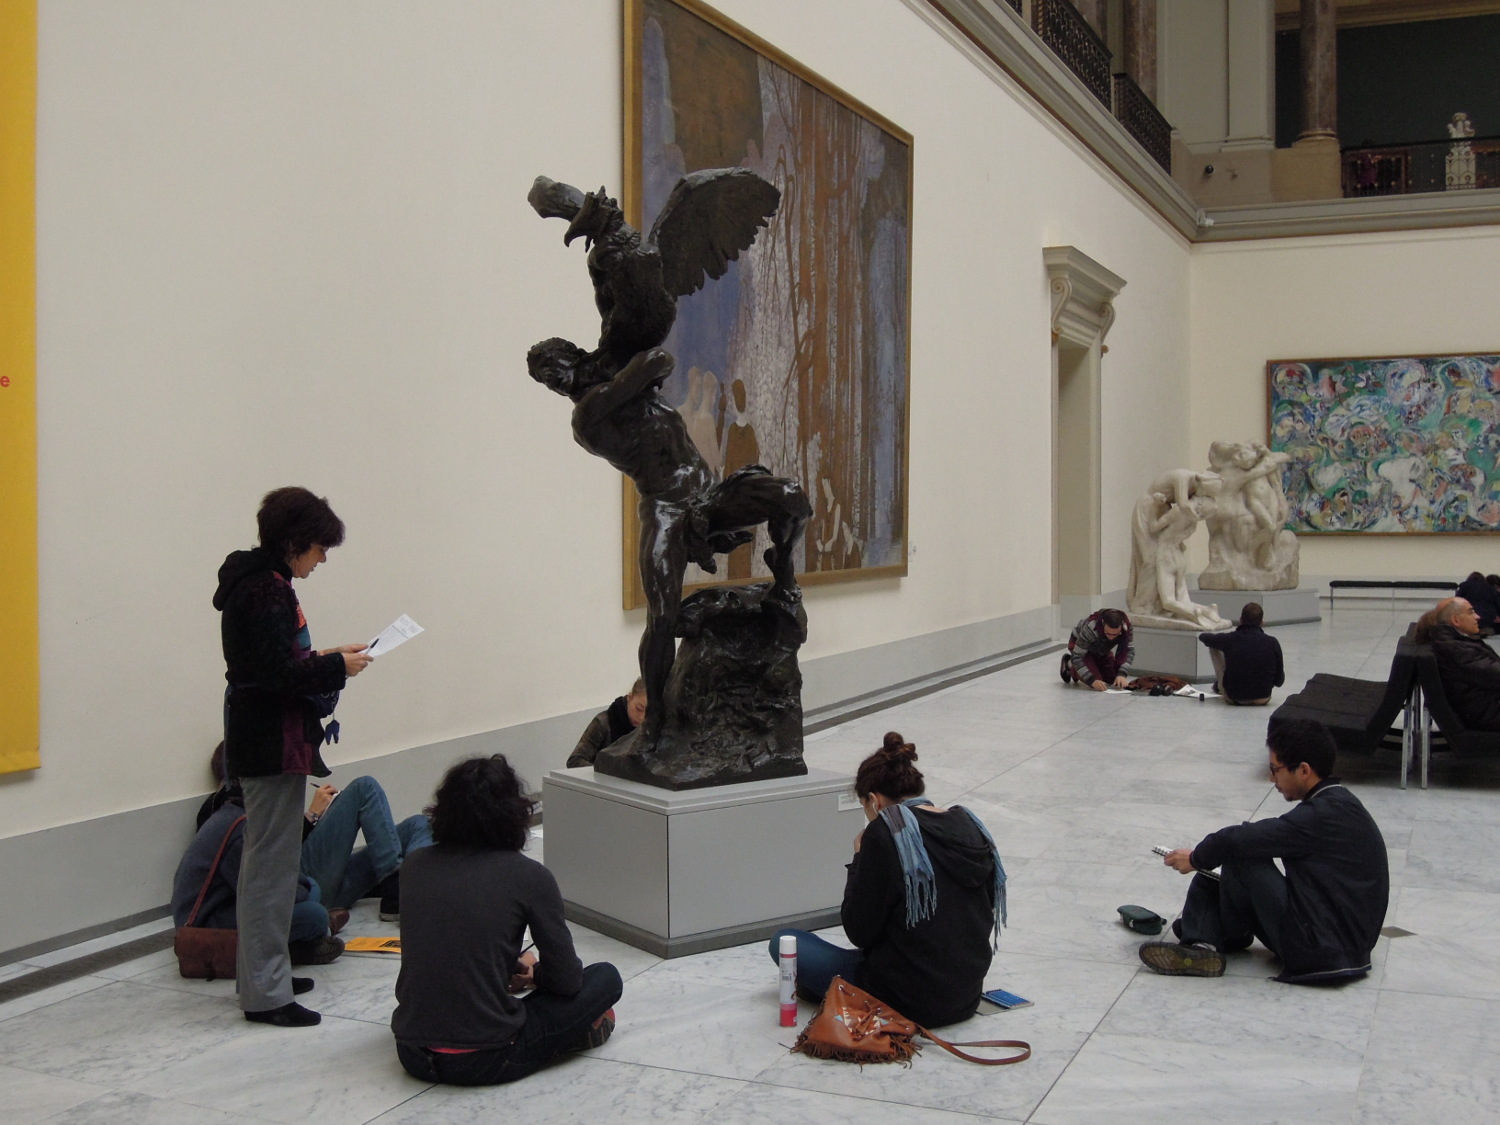  A group of young people is sitting around a sculpture in a museum space. Another person is standing and holding a piece of paper.